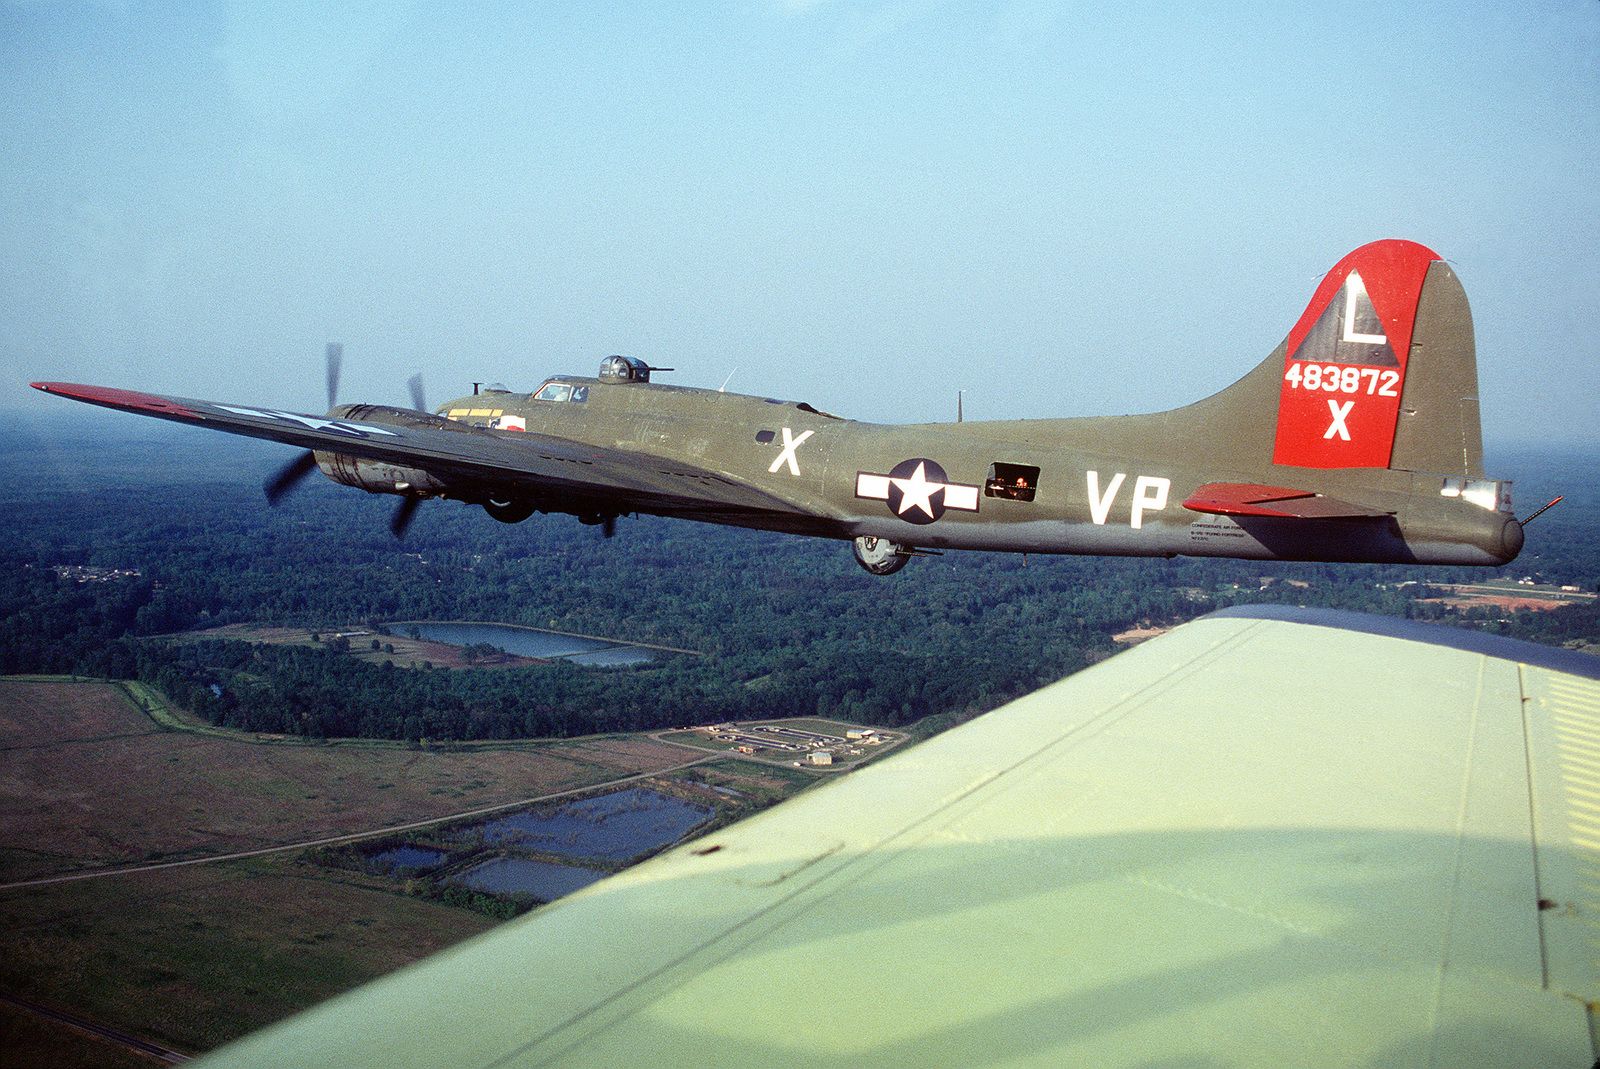 an-air-to-air-left-side-view-of-the-restored-world-war-ii-b-17g-flying-fortress-3567ff-1600